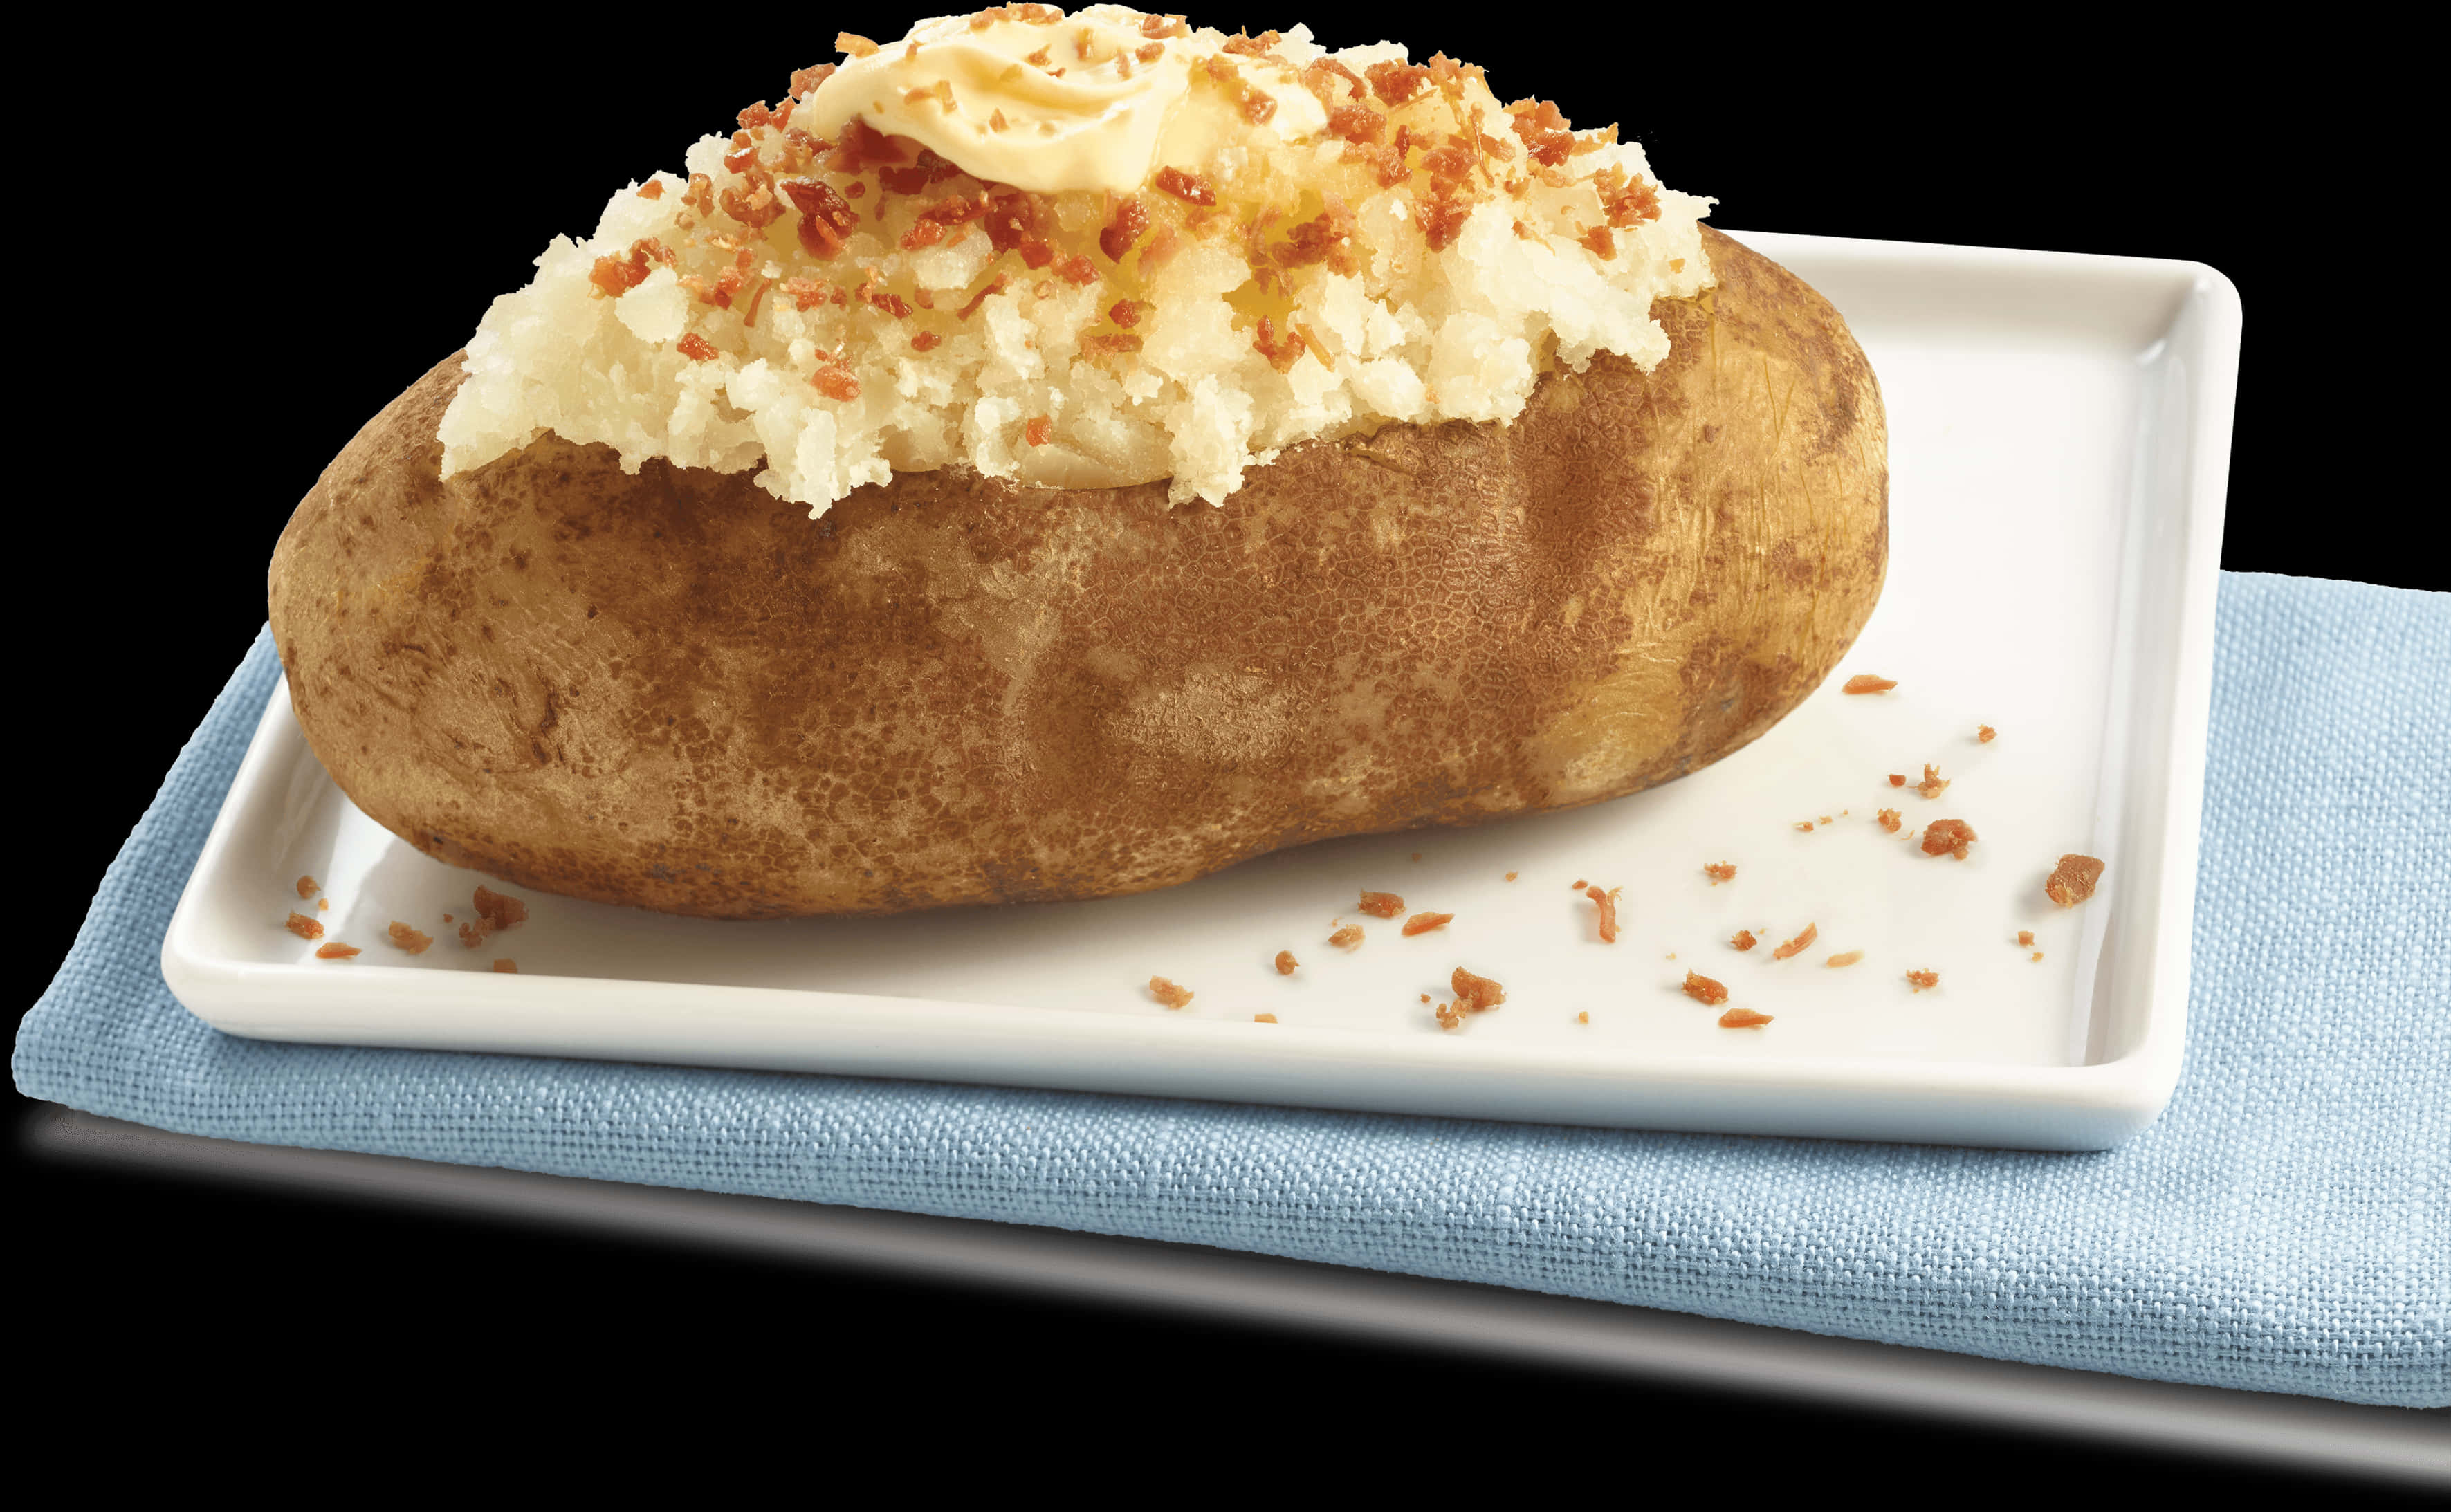 A Baked Potato With Mashed Potatoes On A Plate